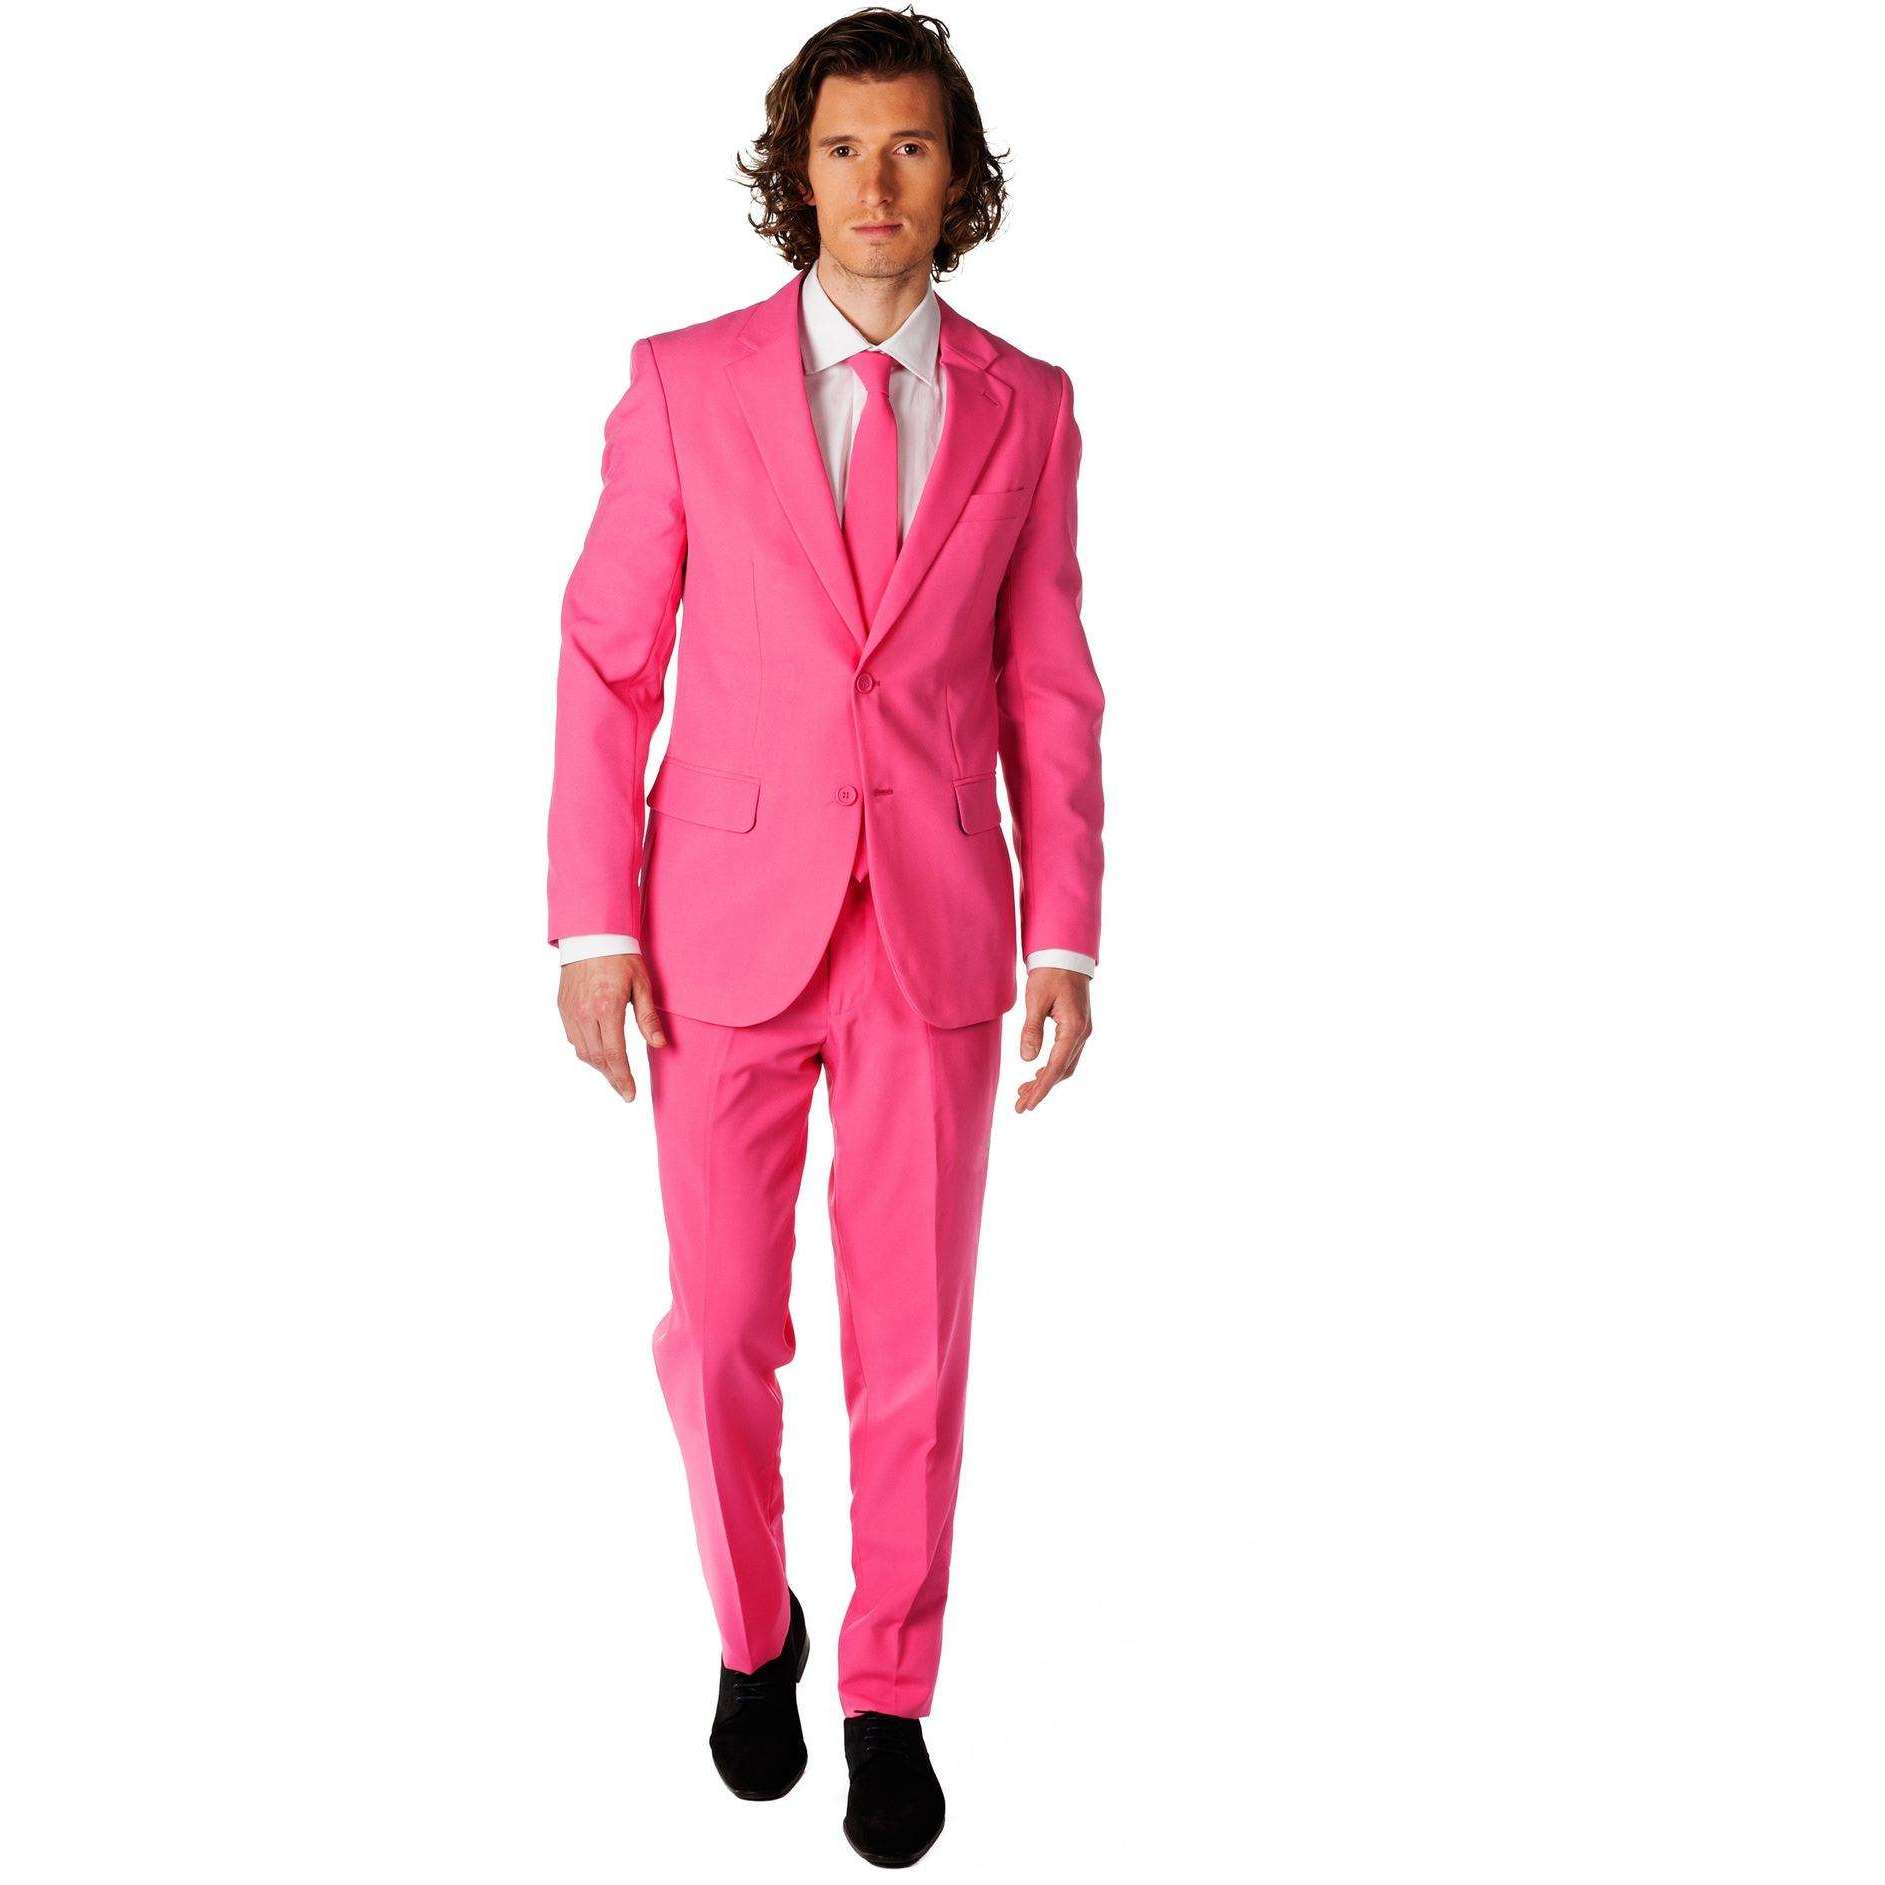 Mr Pink Suit - Opposuits. The coolest